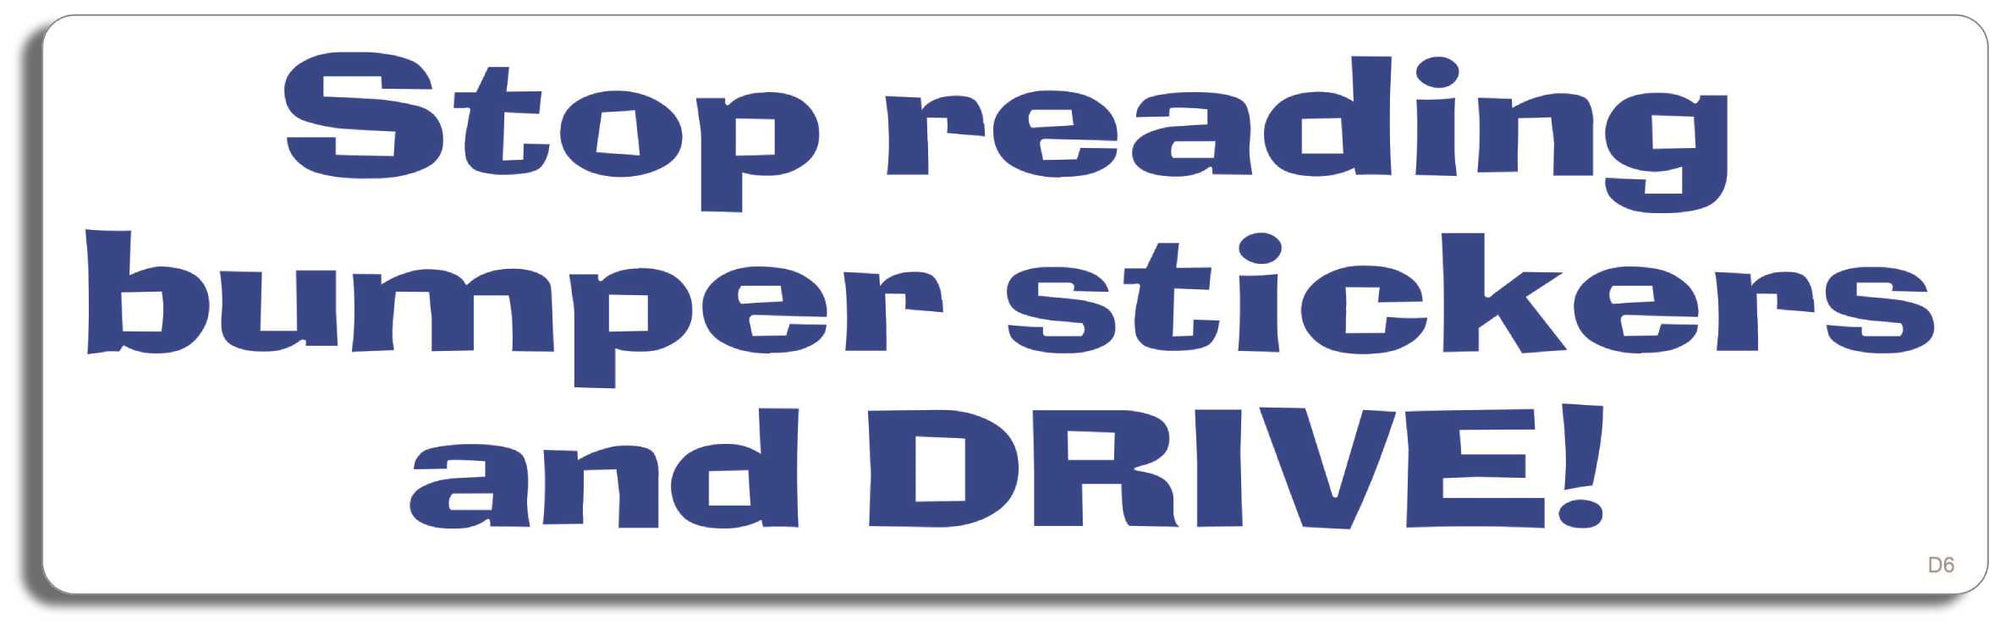 Stop reading bumper Sticker-s and drive - 3" x 10" Bumper Sticker--Car Magnet- -  Decal Car Car Magnet-funny Bumper Sticker Car Magnet Stop reading  stickers and drive-  Decal for carsdrive safely, Driving, Funny, safe driving, tailgaters, tailgating